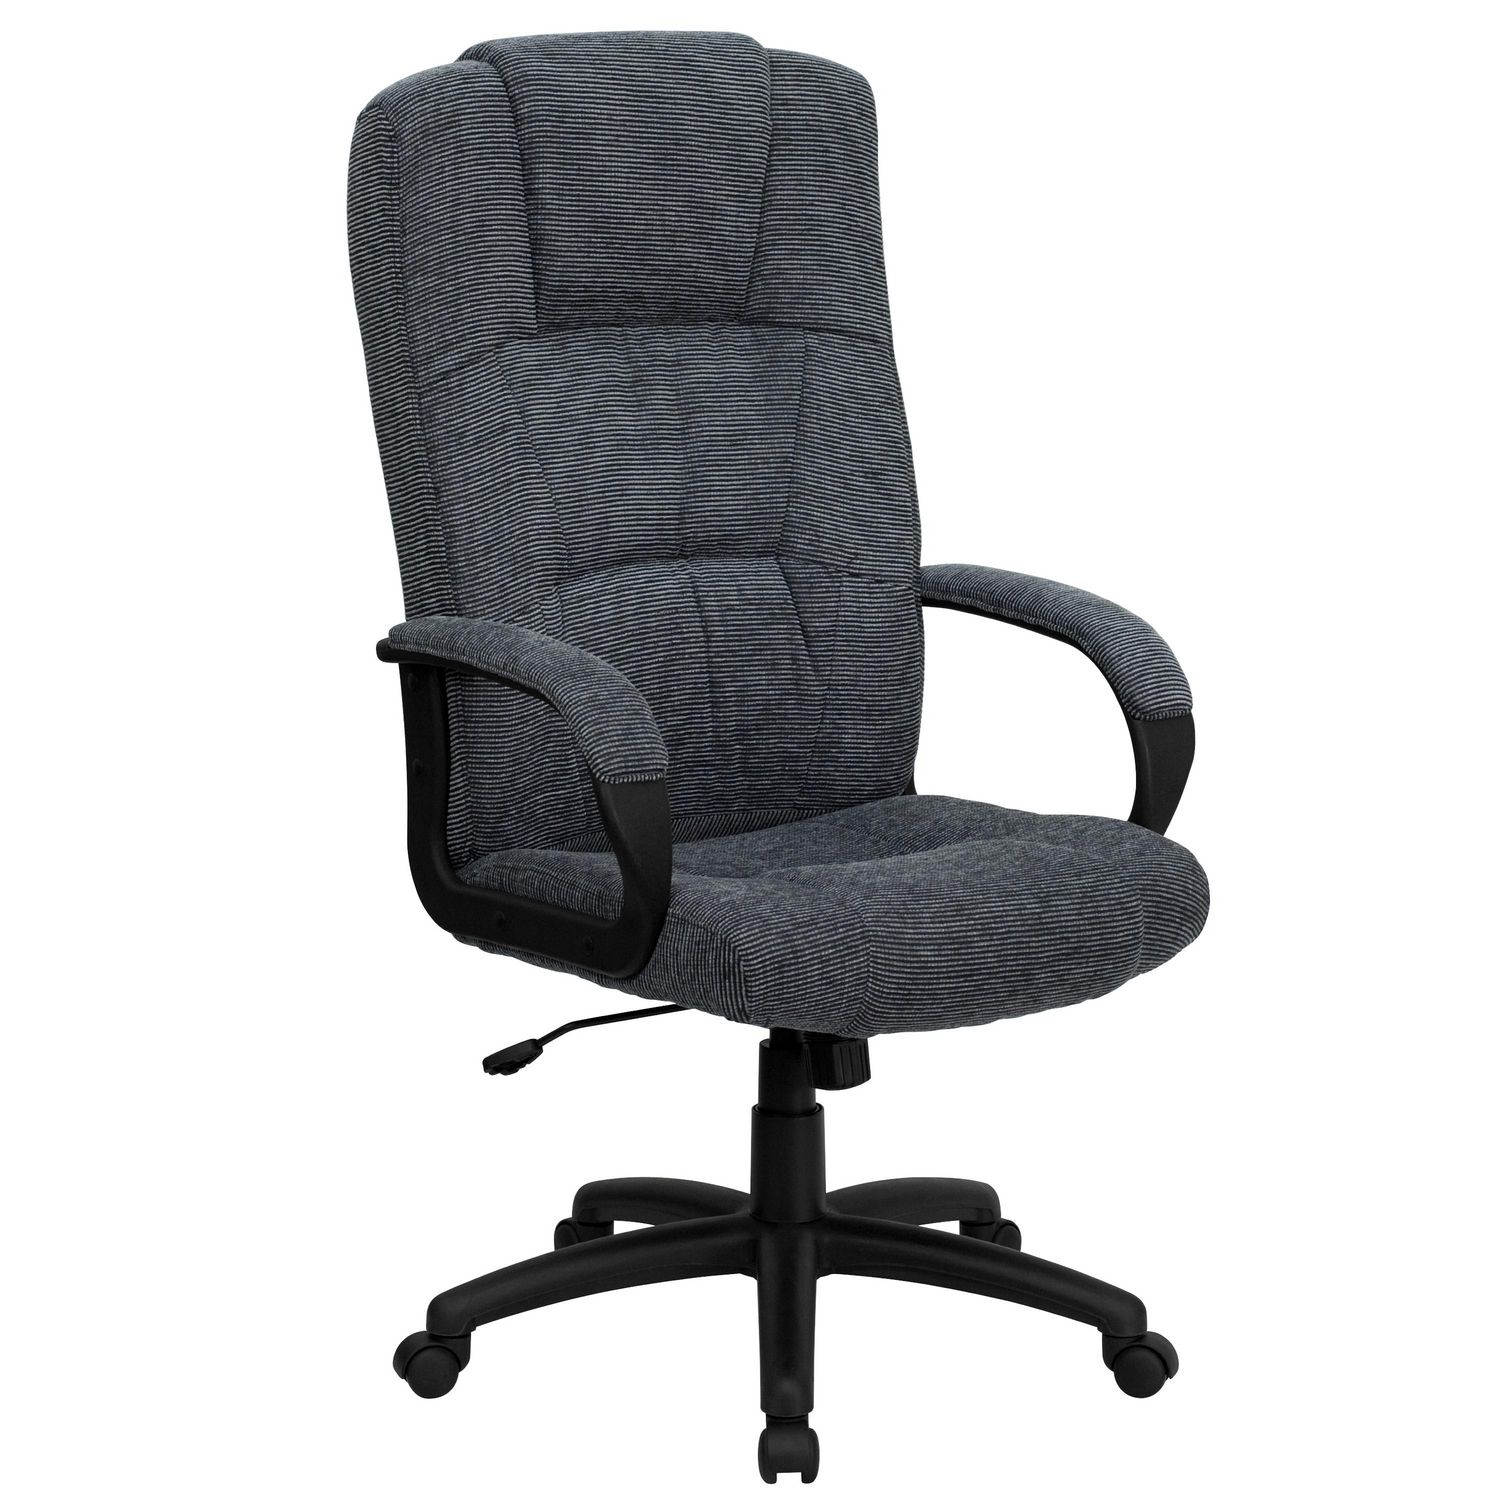 High Back Gray Fabric Executive Swivel Chair with Arms | Walmart Canada